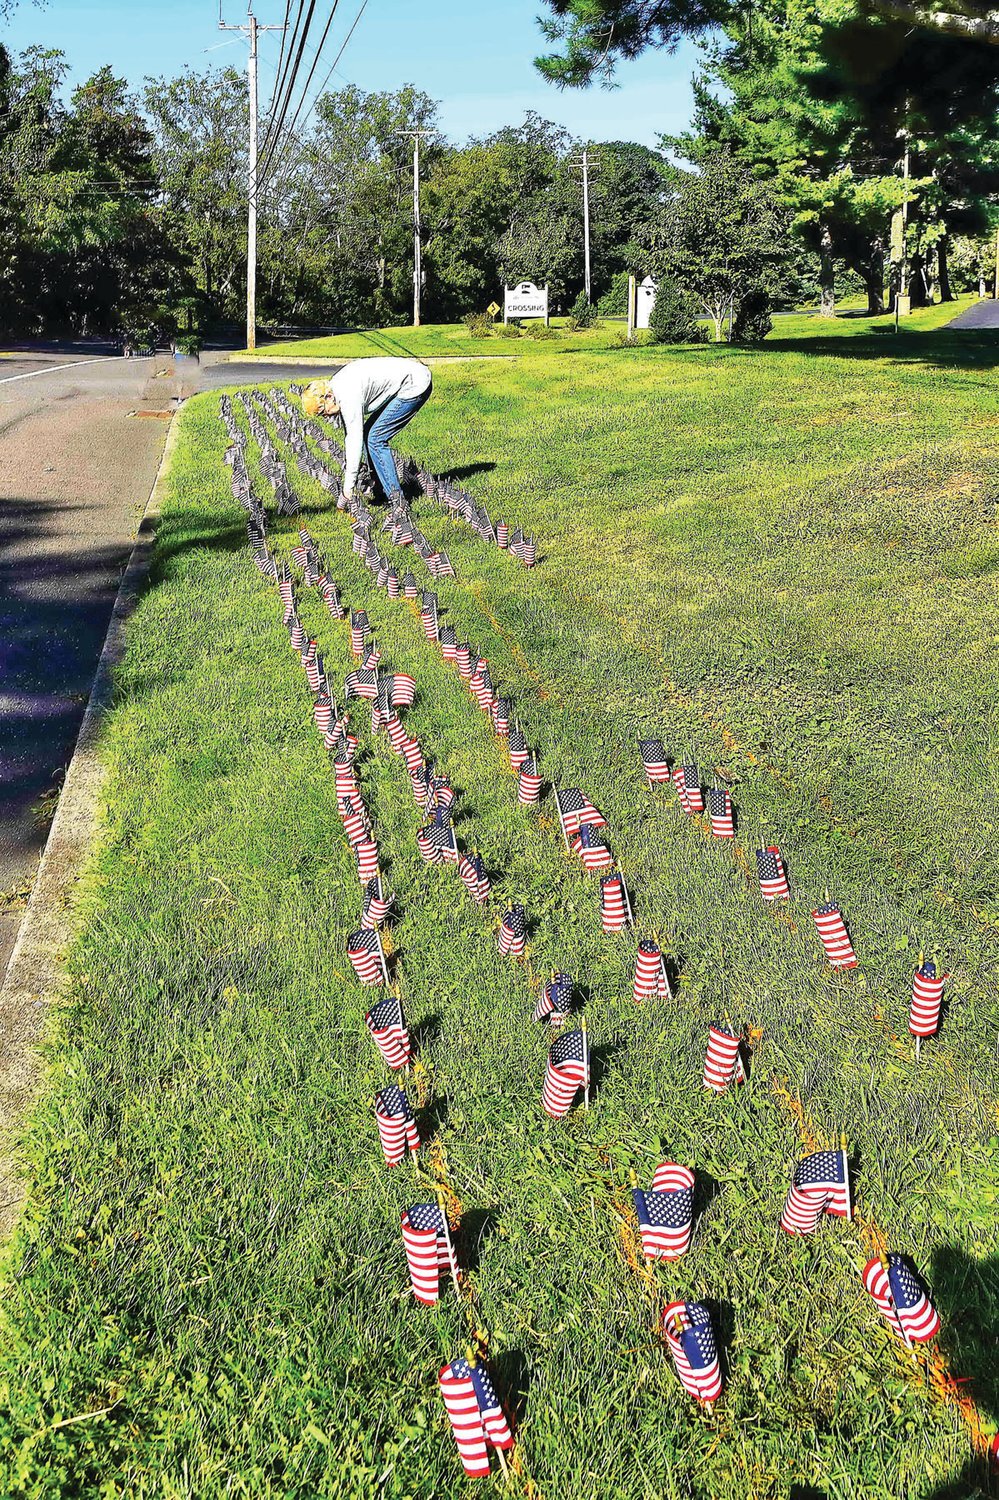 A view of the flags placed on the church property.